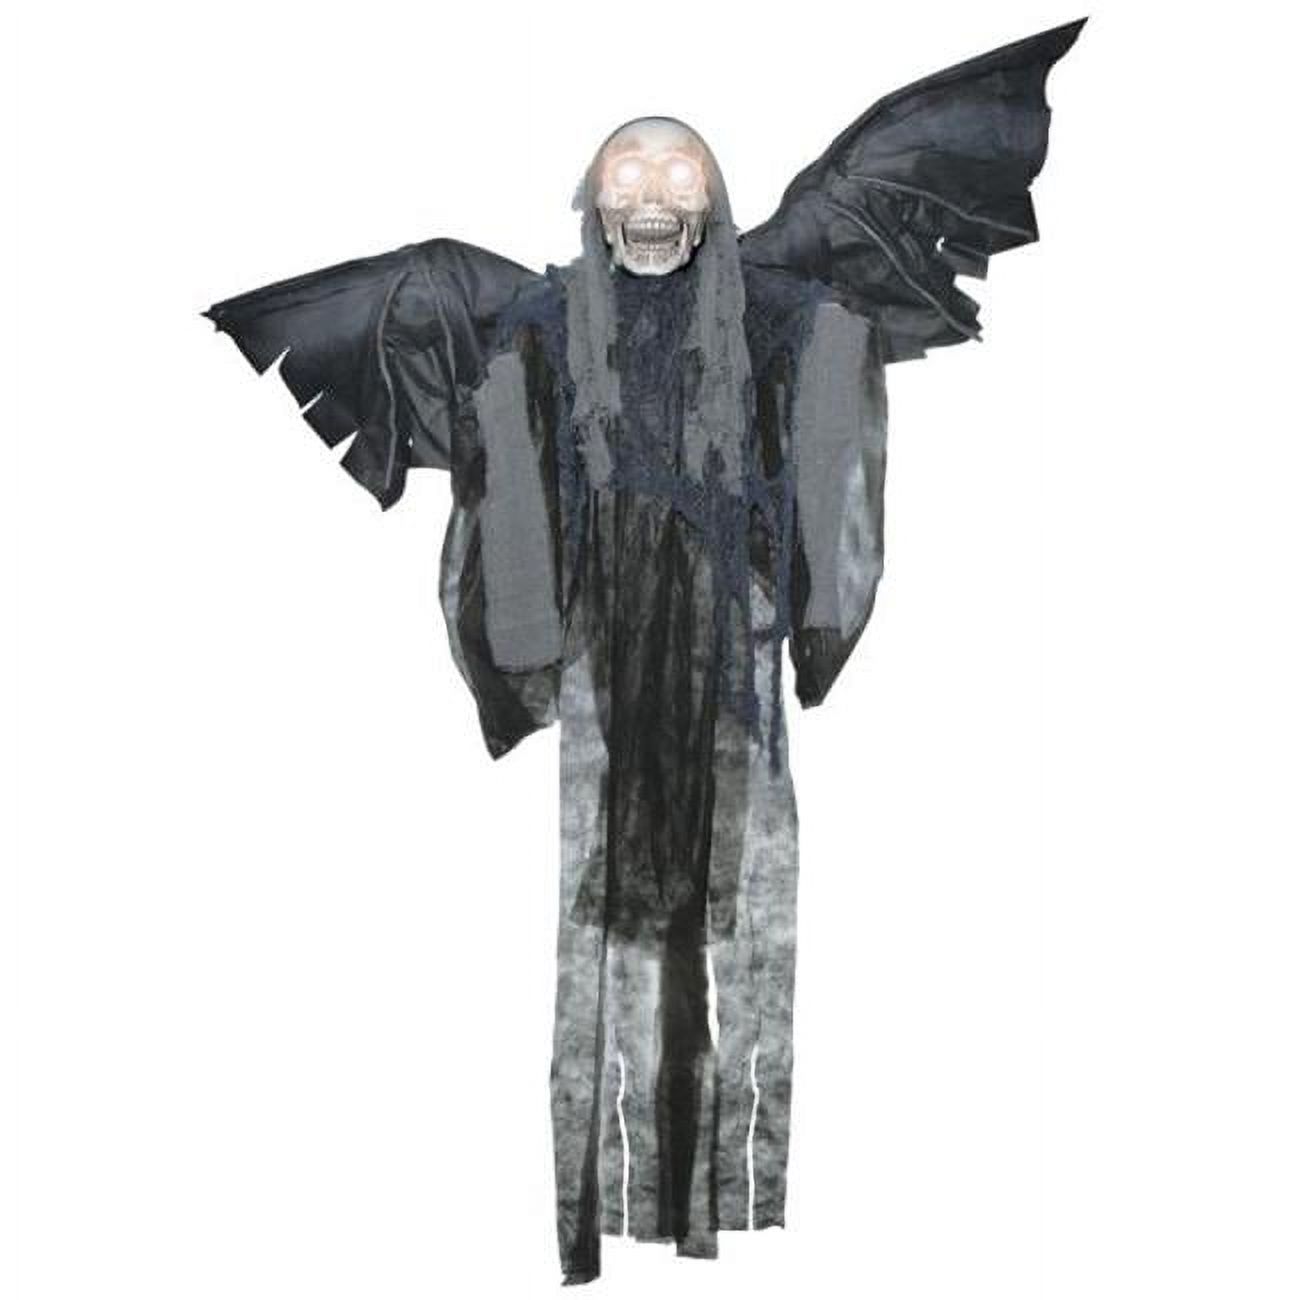 Sunstar Winged Reaper Talking Light-Up Hanging Halloween Decoration - 60 in - image 1 of 2